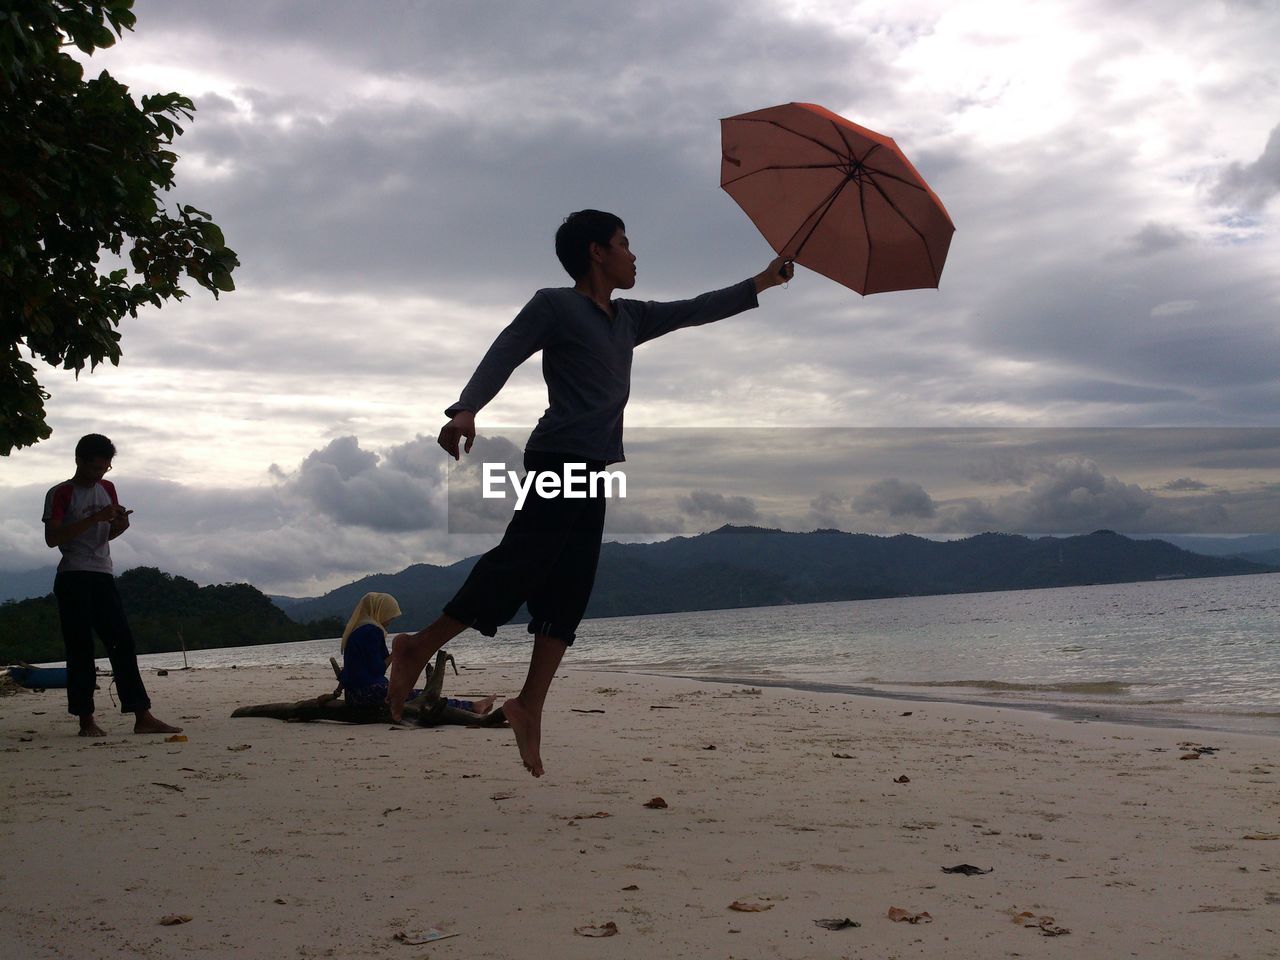 Side view of young man with umbrella jumping at beach against cloudy sky